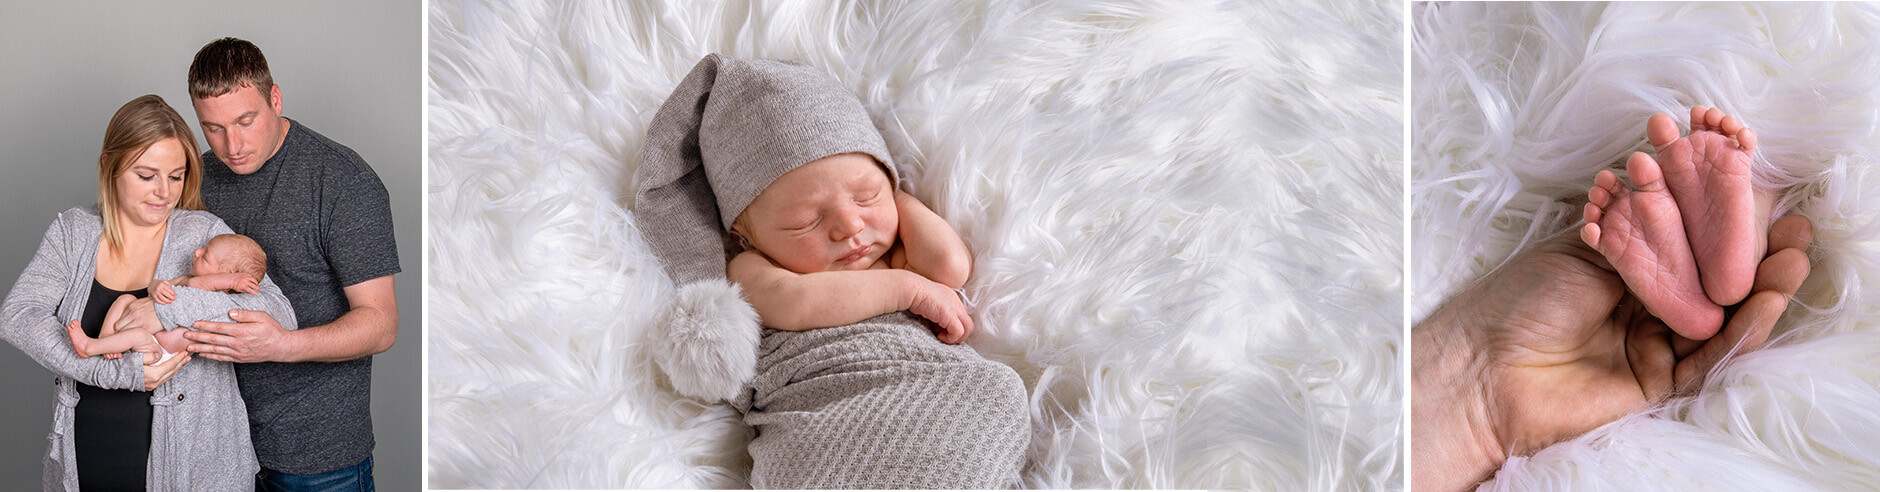 Best Poses for Newborn Photo Sessions